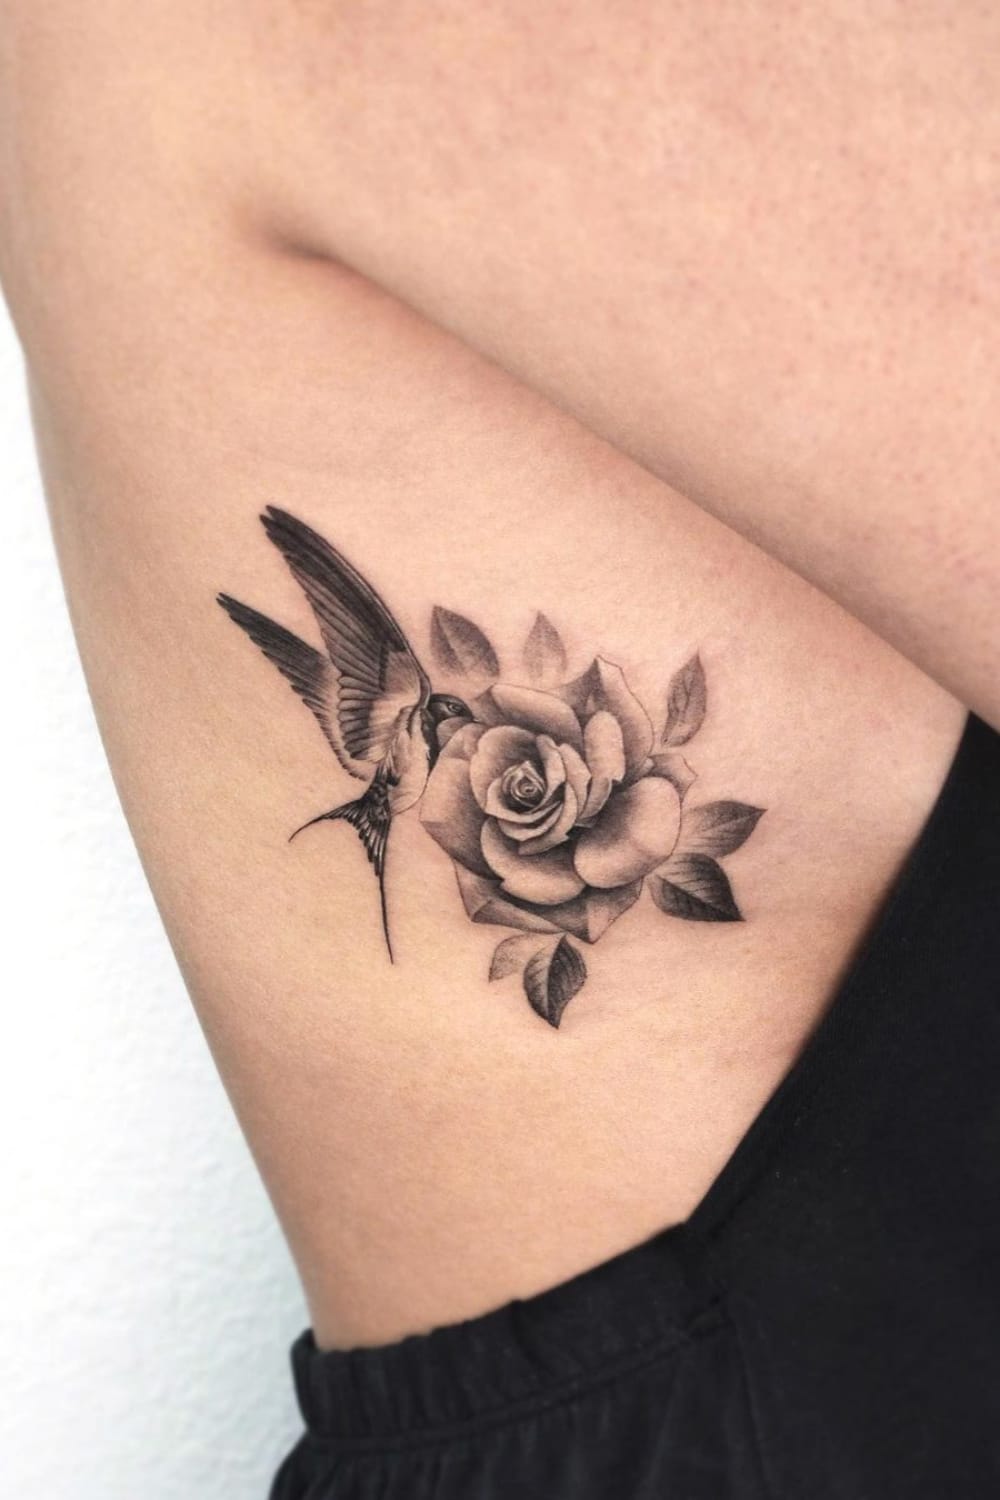 Rose and Swallow Tattoo